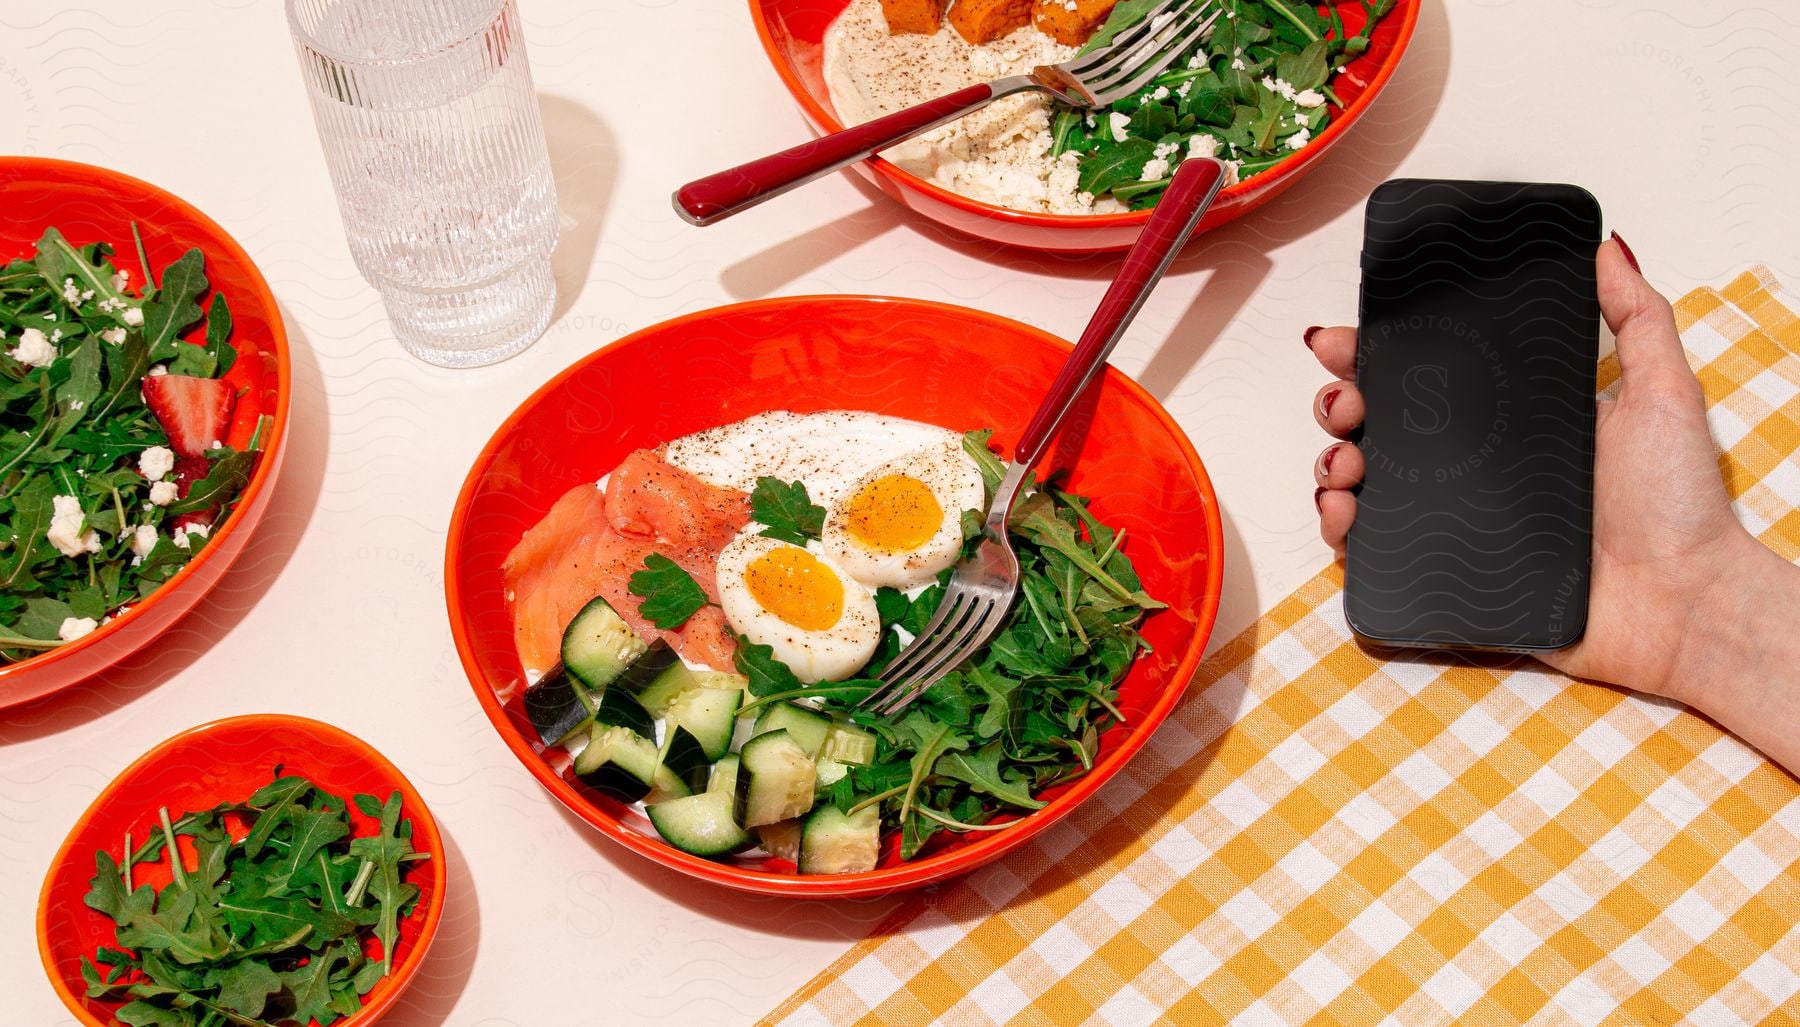 person holding a cell phone in front of a bowl of food with vegetables, including lettuce, tomatoes, cucumbers, and hard-boiled eggs.